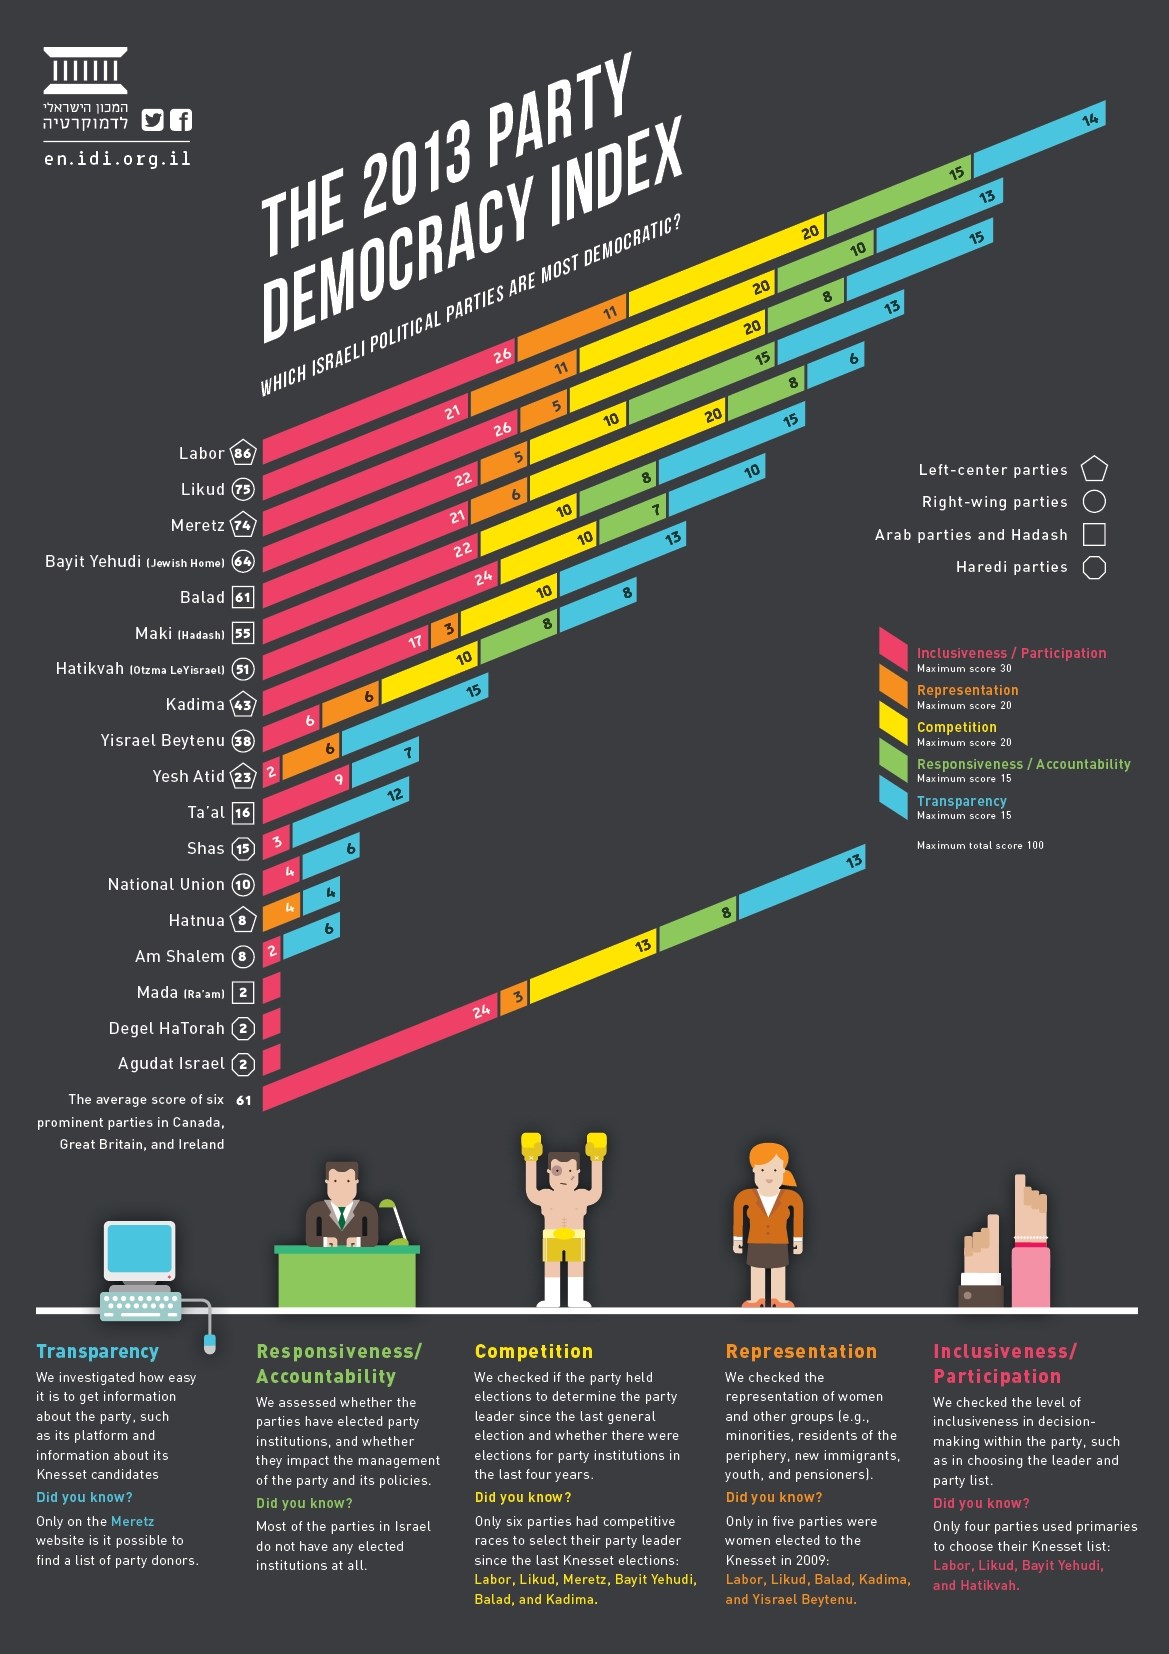 The Party Democracy Index 2013